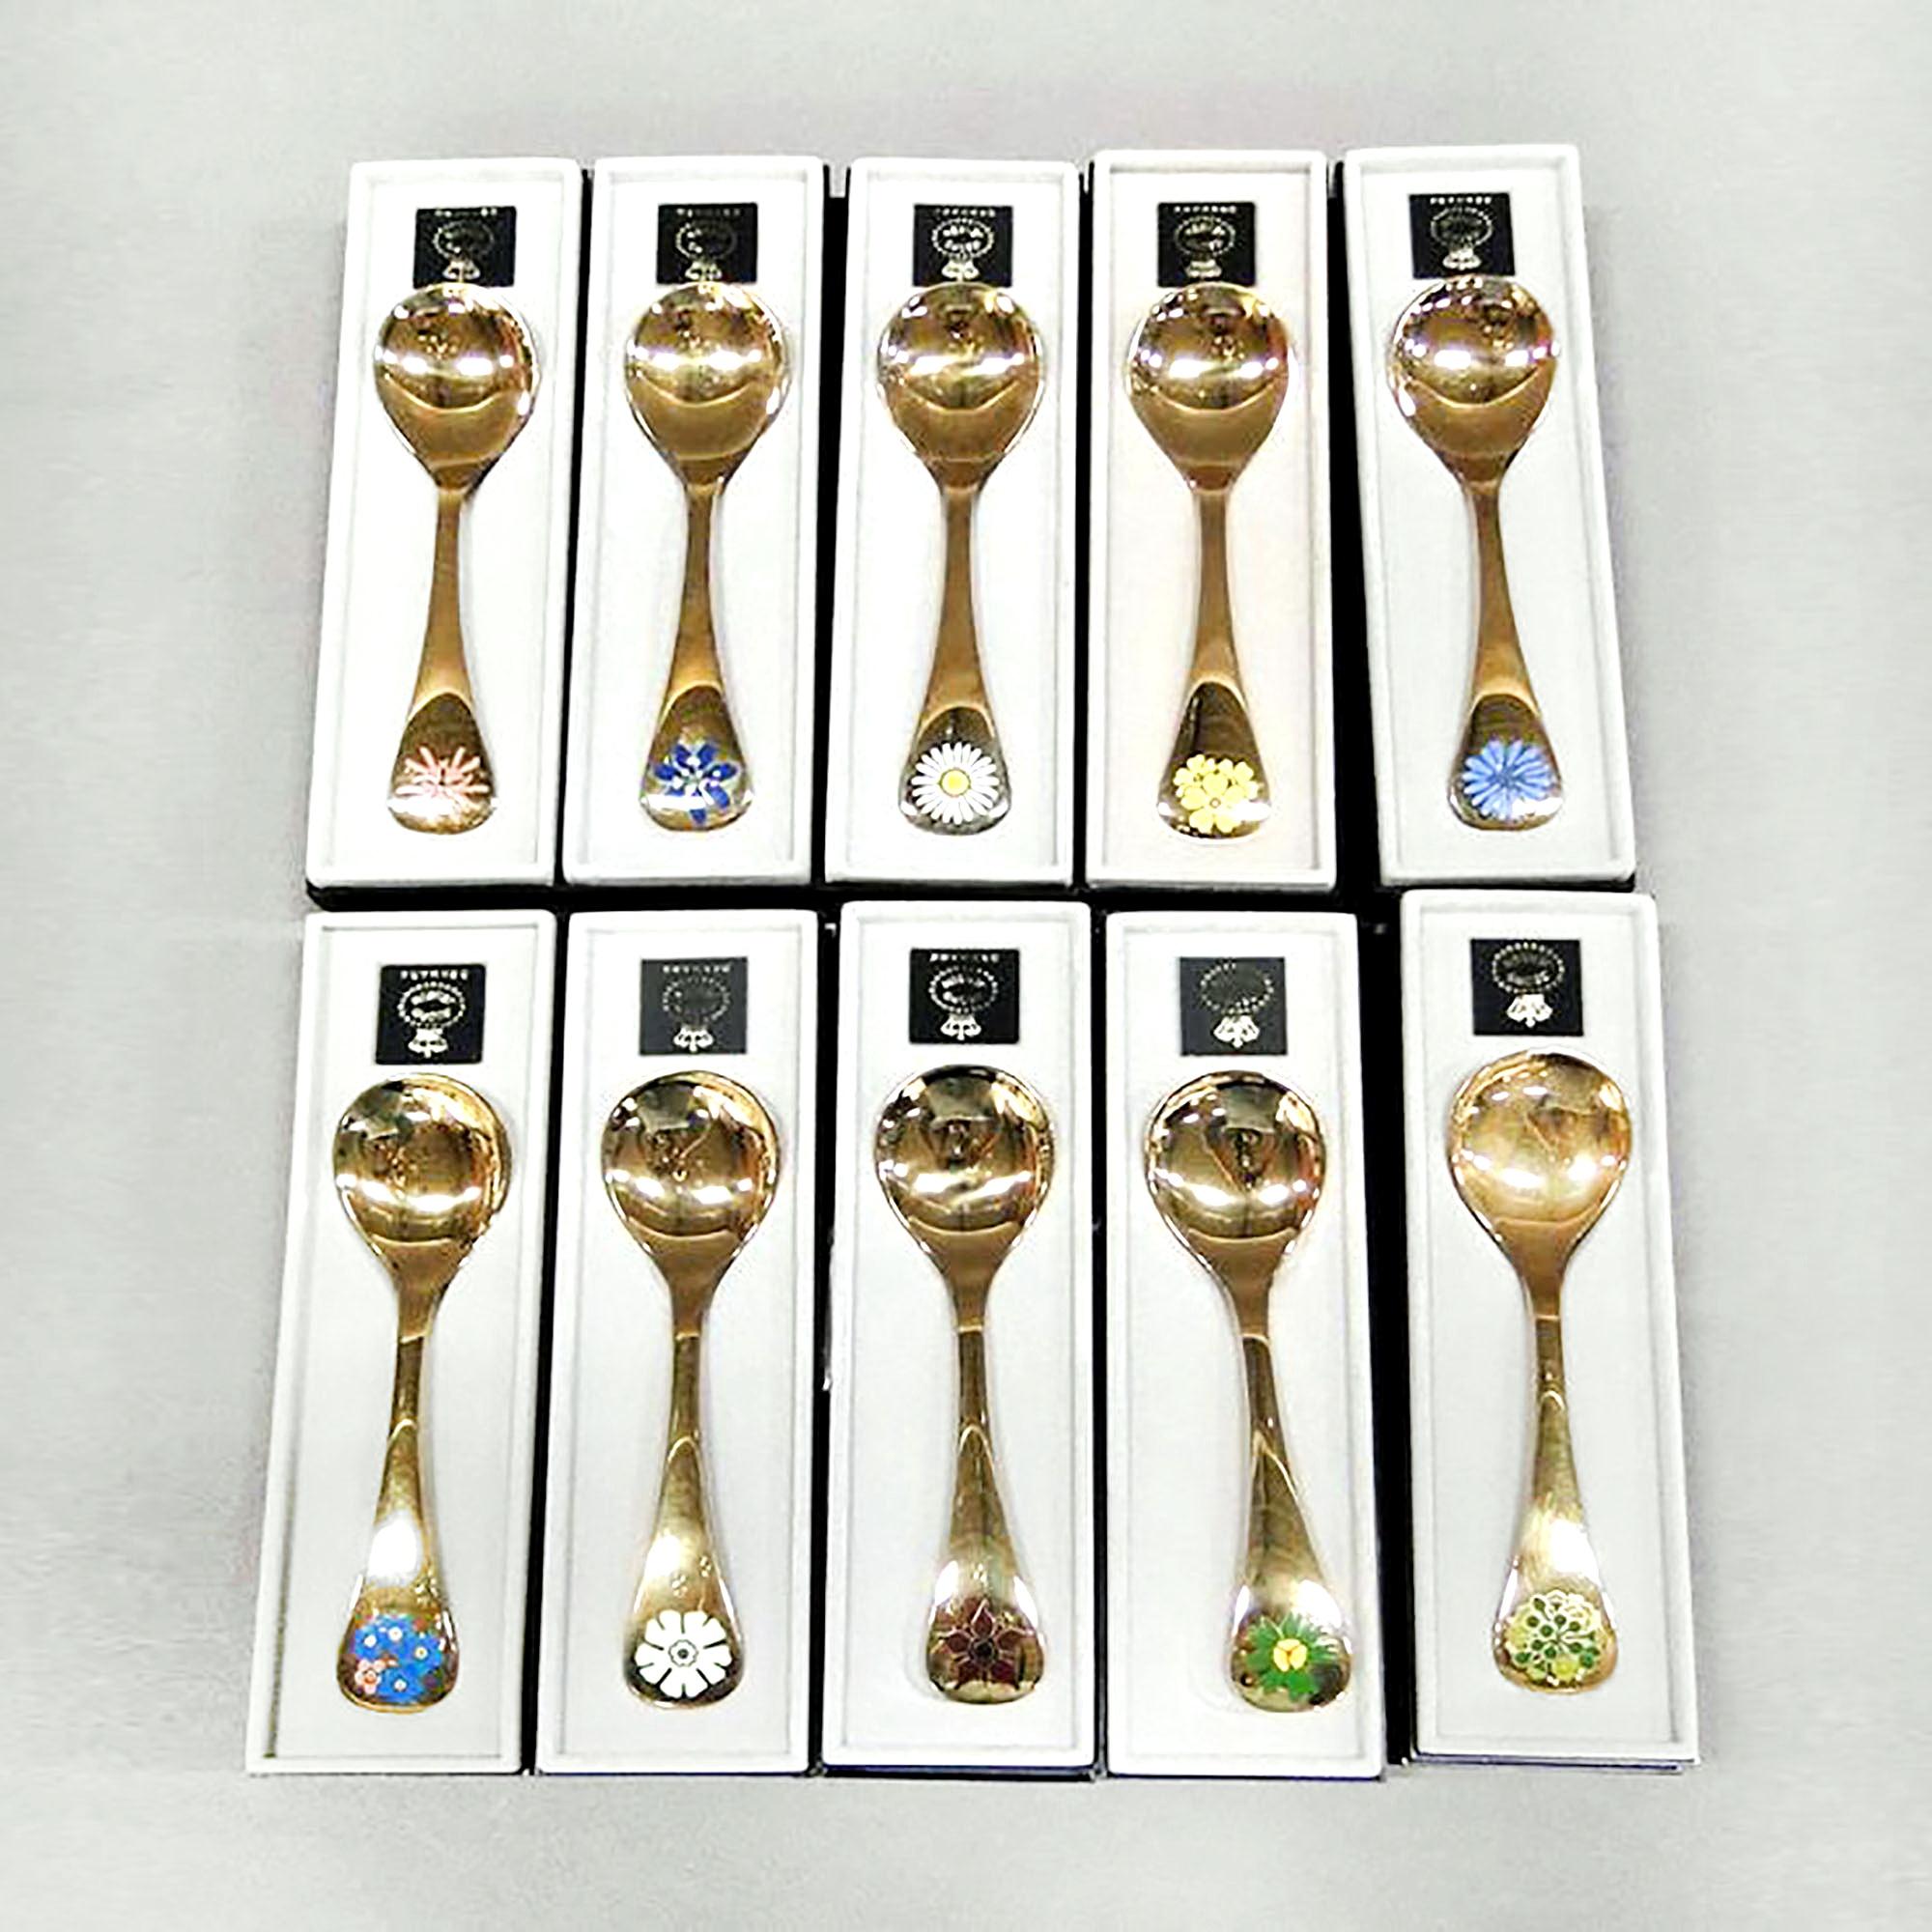 Annual spoons 1980-1989 in original box, designed by Annelise Björner, edited by Georg Jensen.
Annual spoons series began in 1971. Each spoon is crafted in sterling silver, then gold-plated and enameled with a wildflower chosen for that year. Year